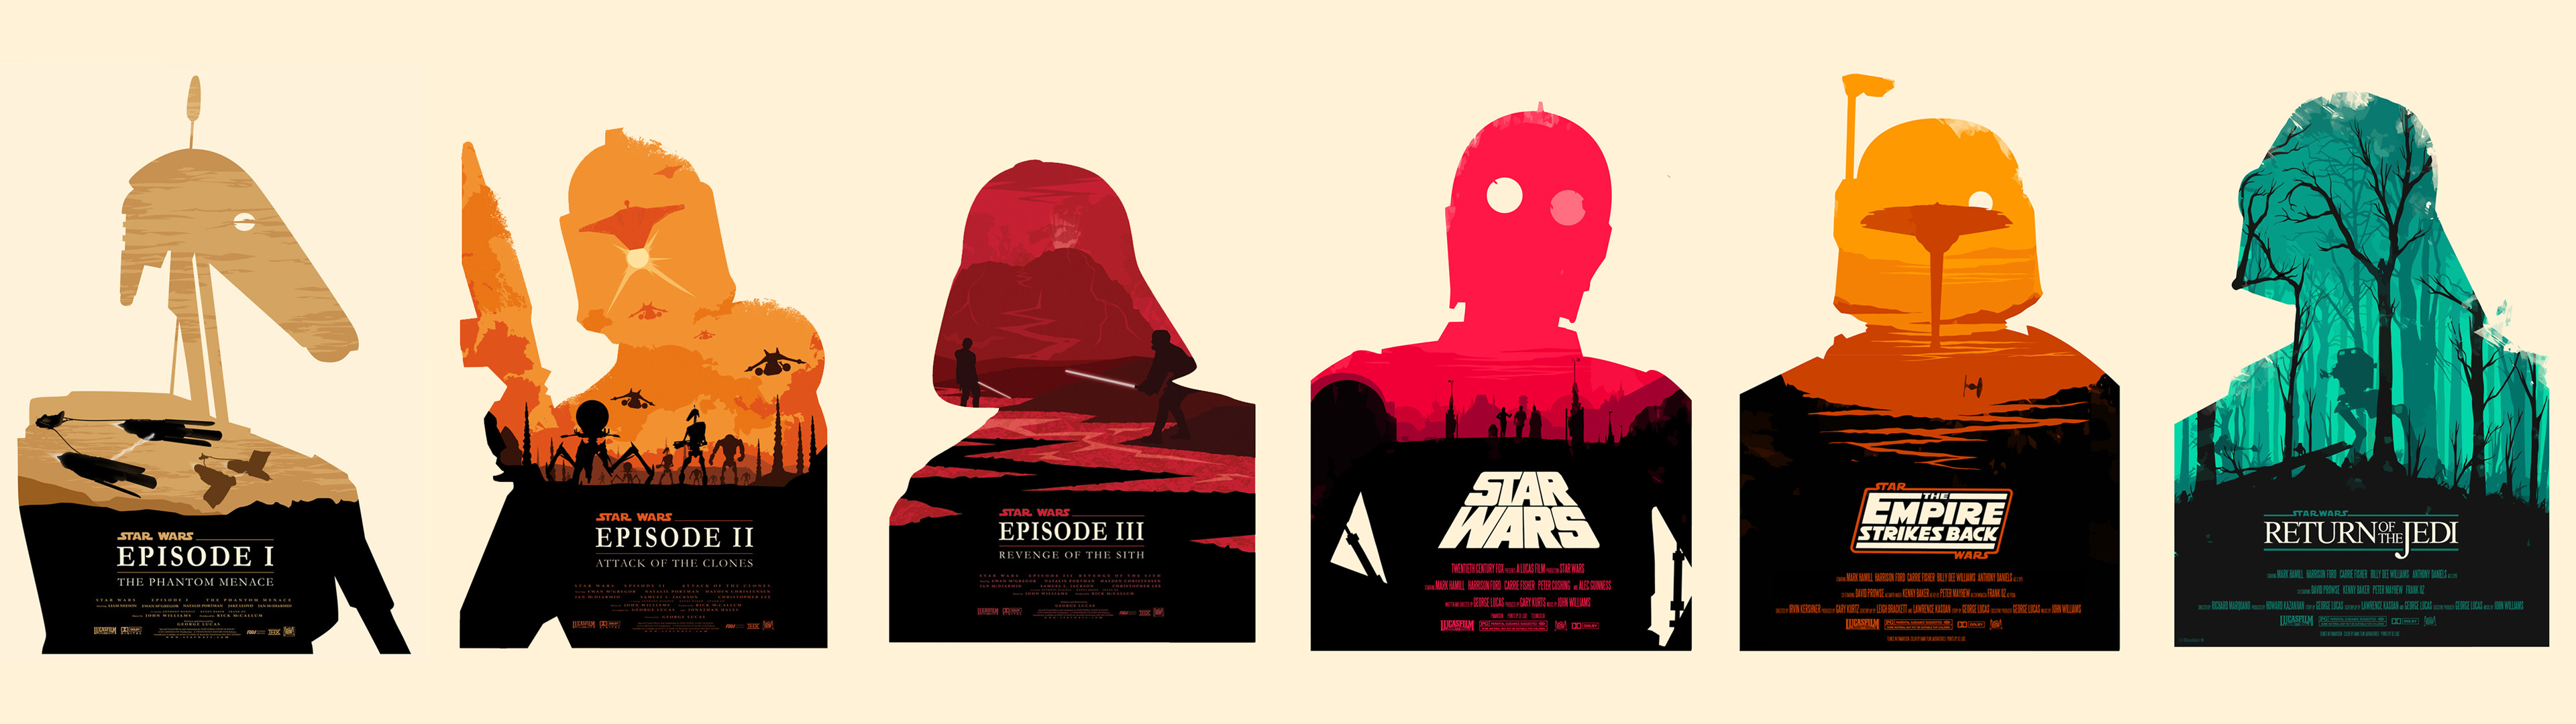 3840x1080 Dual-monitor-Star-Wars-posters--by-Douglas-